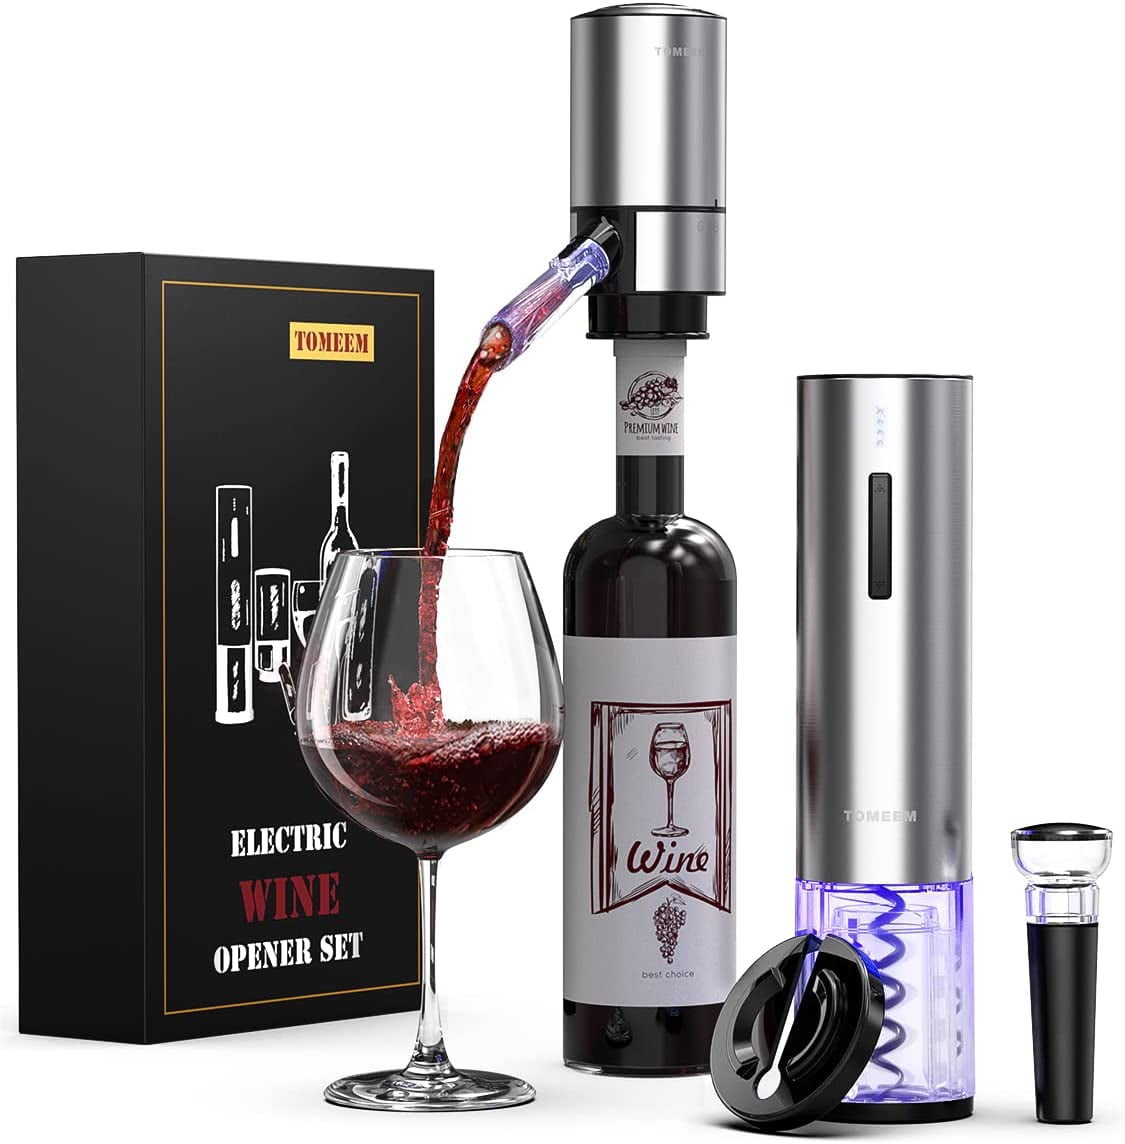 Oster Cordless Electric Wine Bottle: It Does What It's Supposed to Do